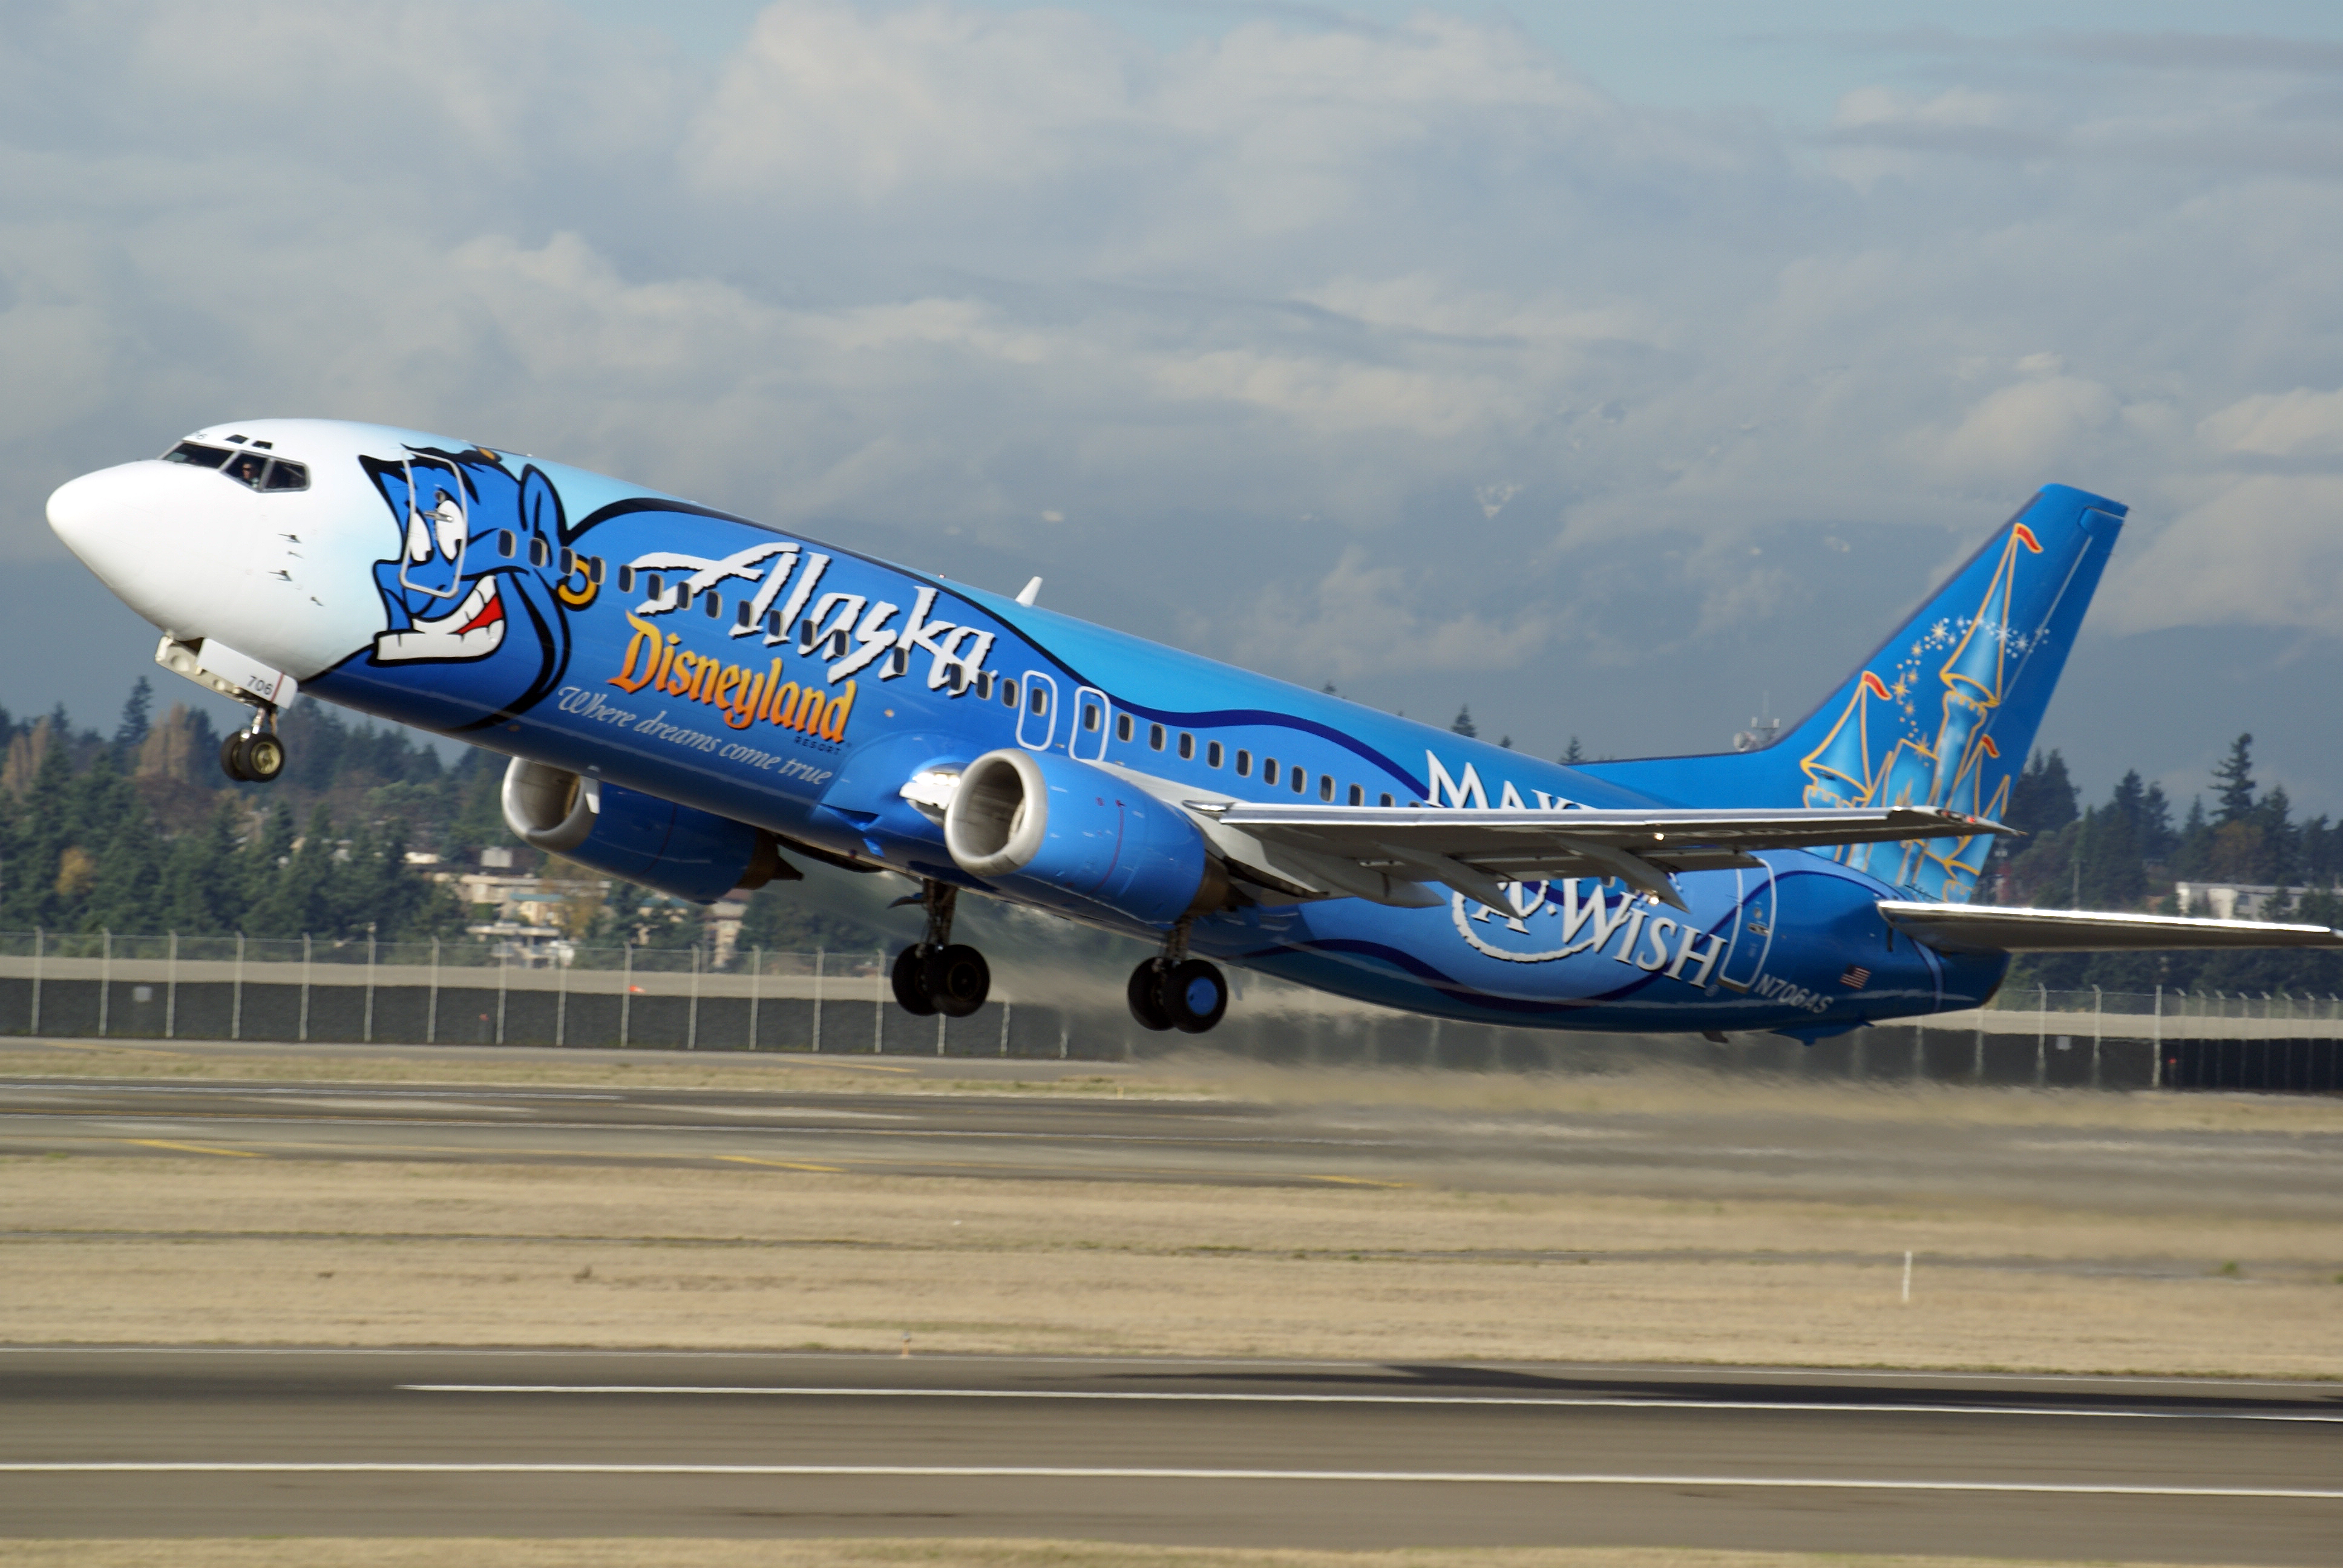 Alaska Airlines’ giant blue Genie dubbed the “Spirit of Make-a-Wish” plane flies throughout the carrier’s route network. First introduced in 2006, the Boeing 737-400 celebrates the long-term partnership between the Make-A-Wish Foundation, Disneyland Resorts and Alaska Airlines.